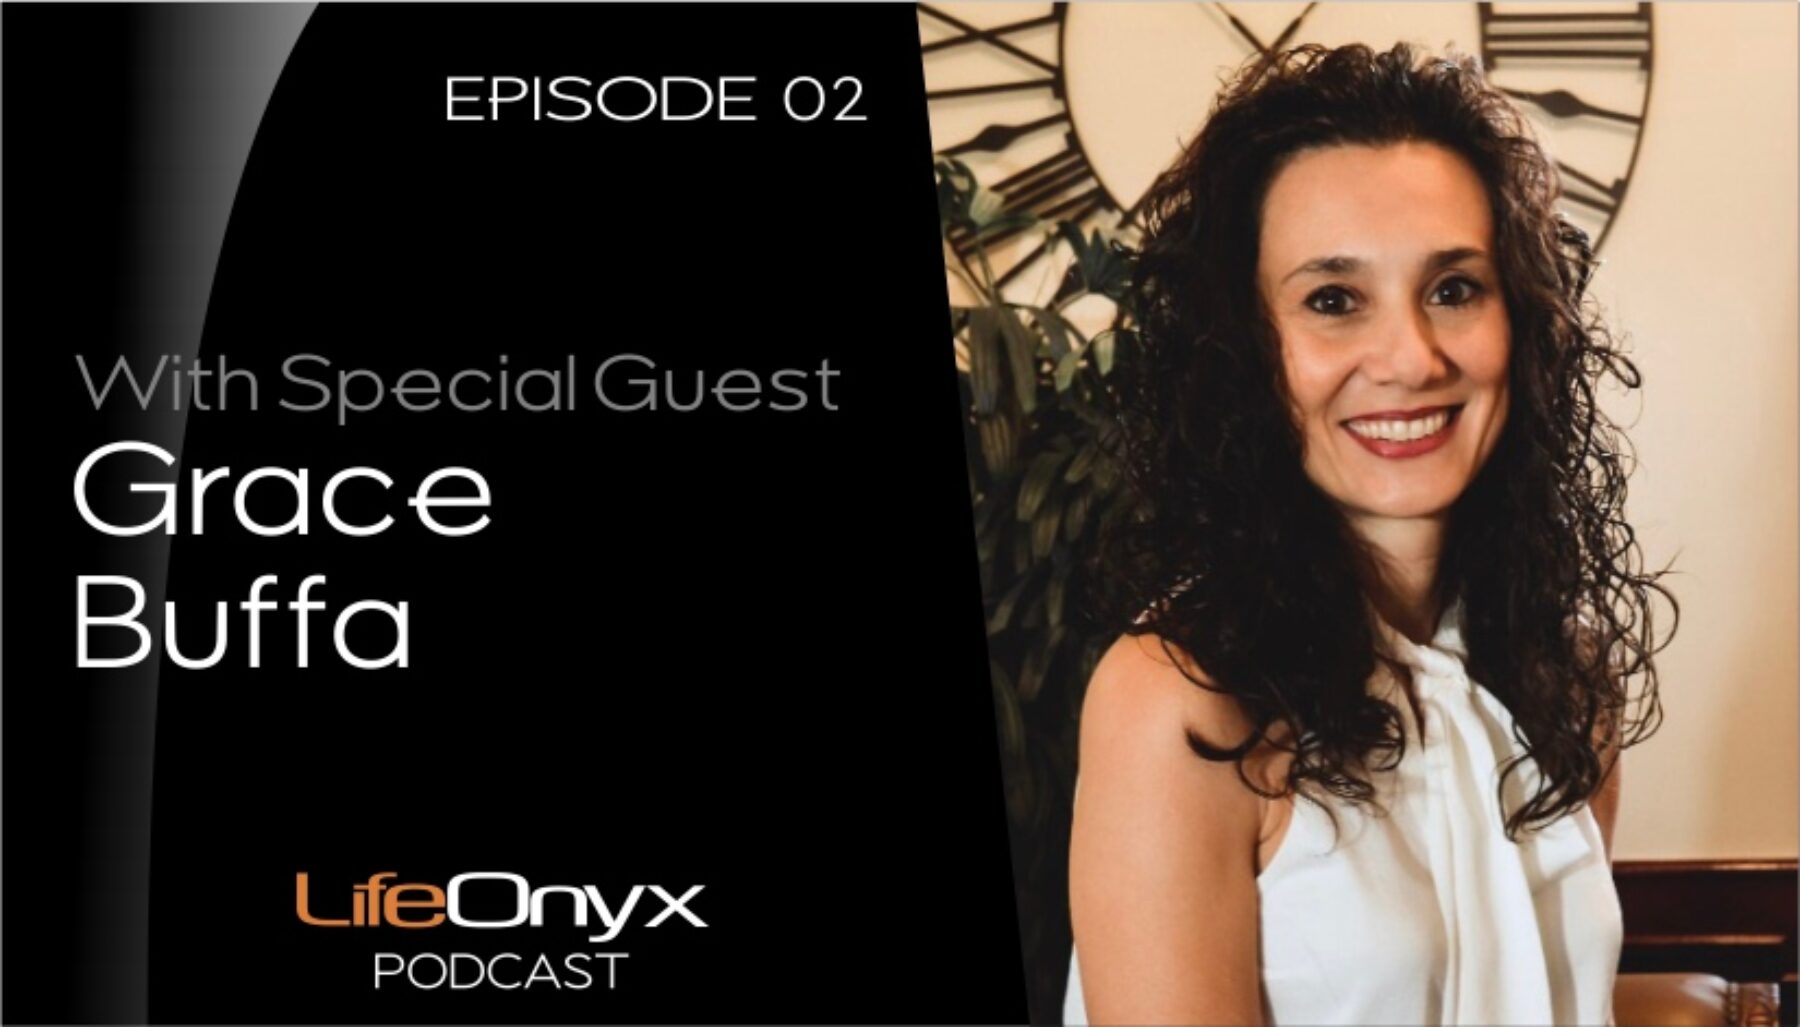 Ep 2 - Detoxing your life with a purpose with Grace Buffa - LifeOnyx Podcast